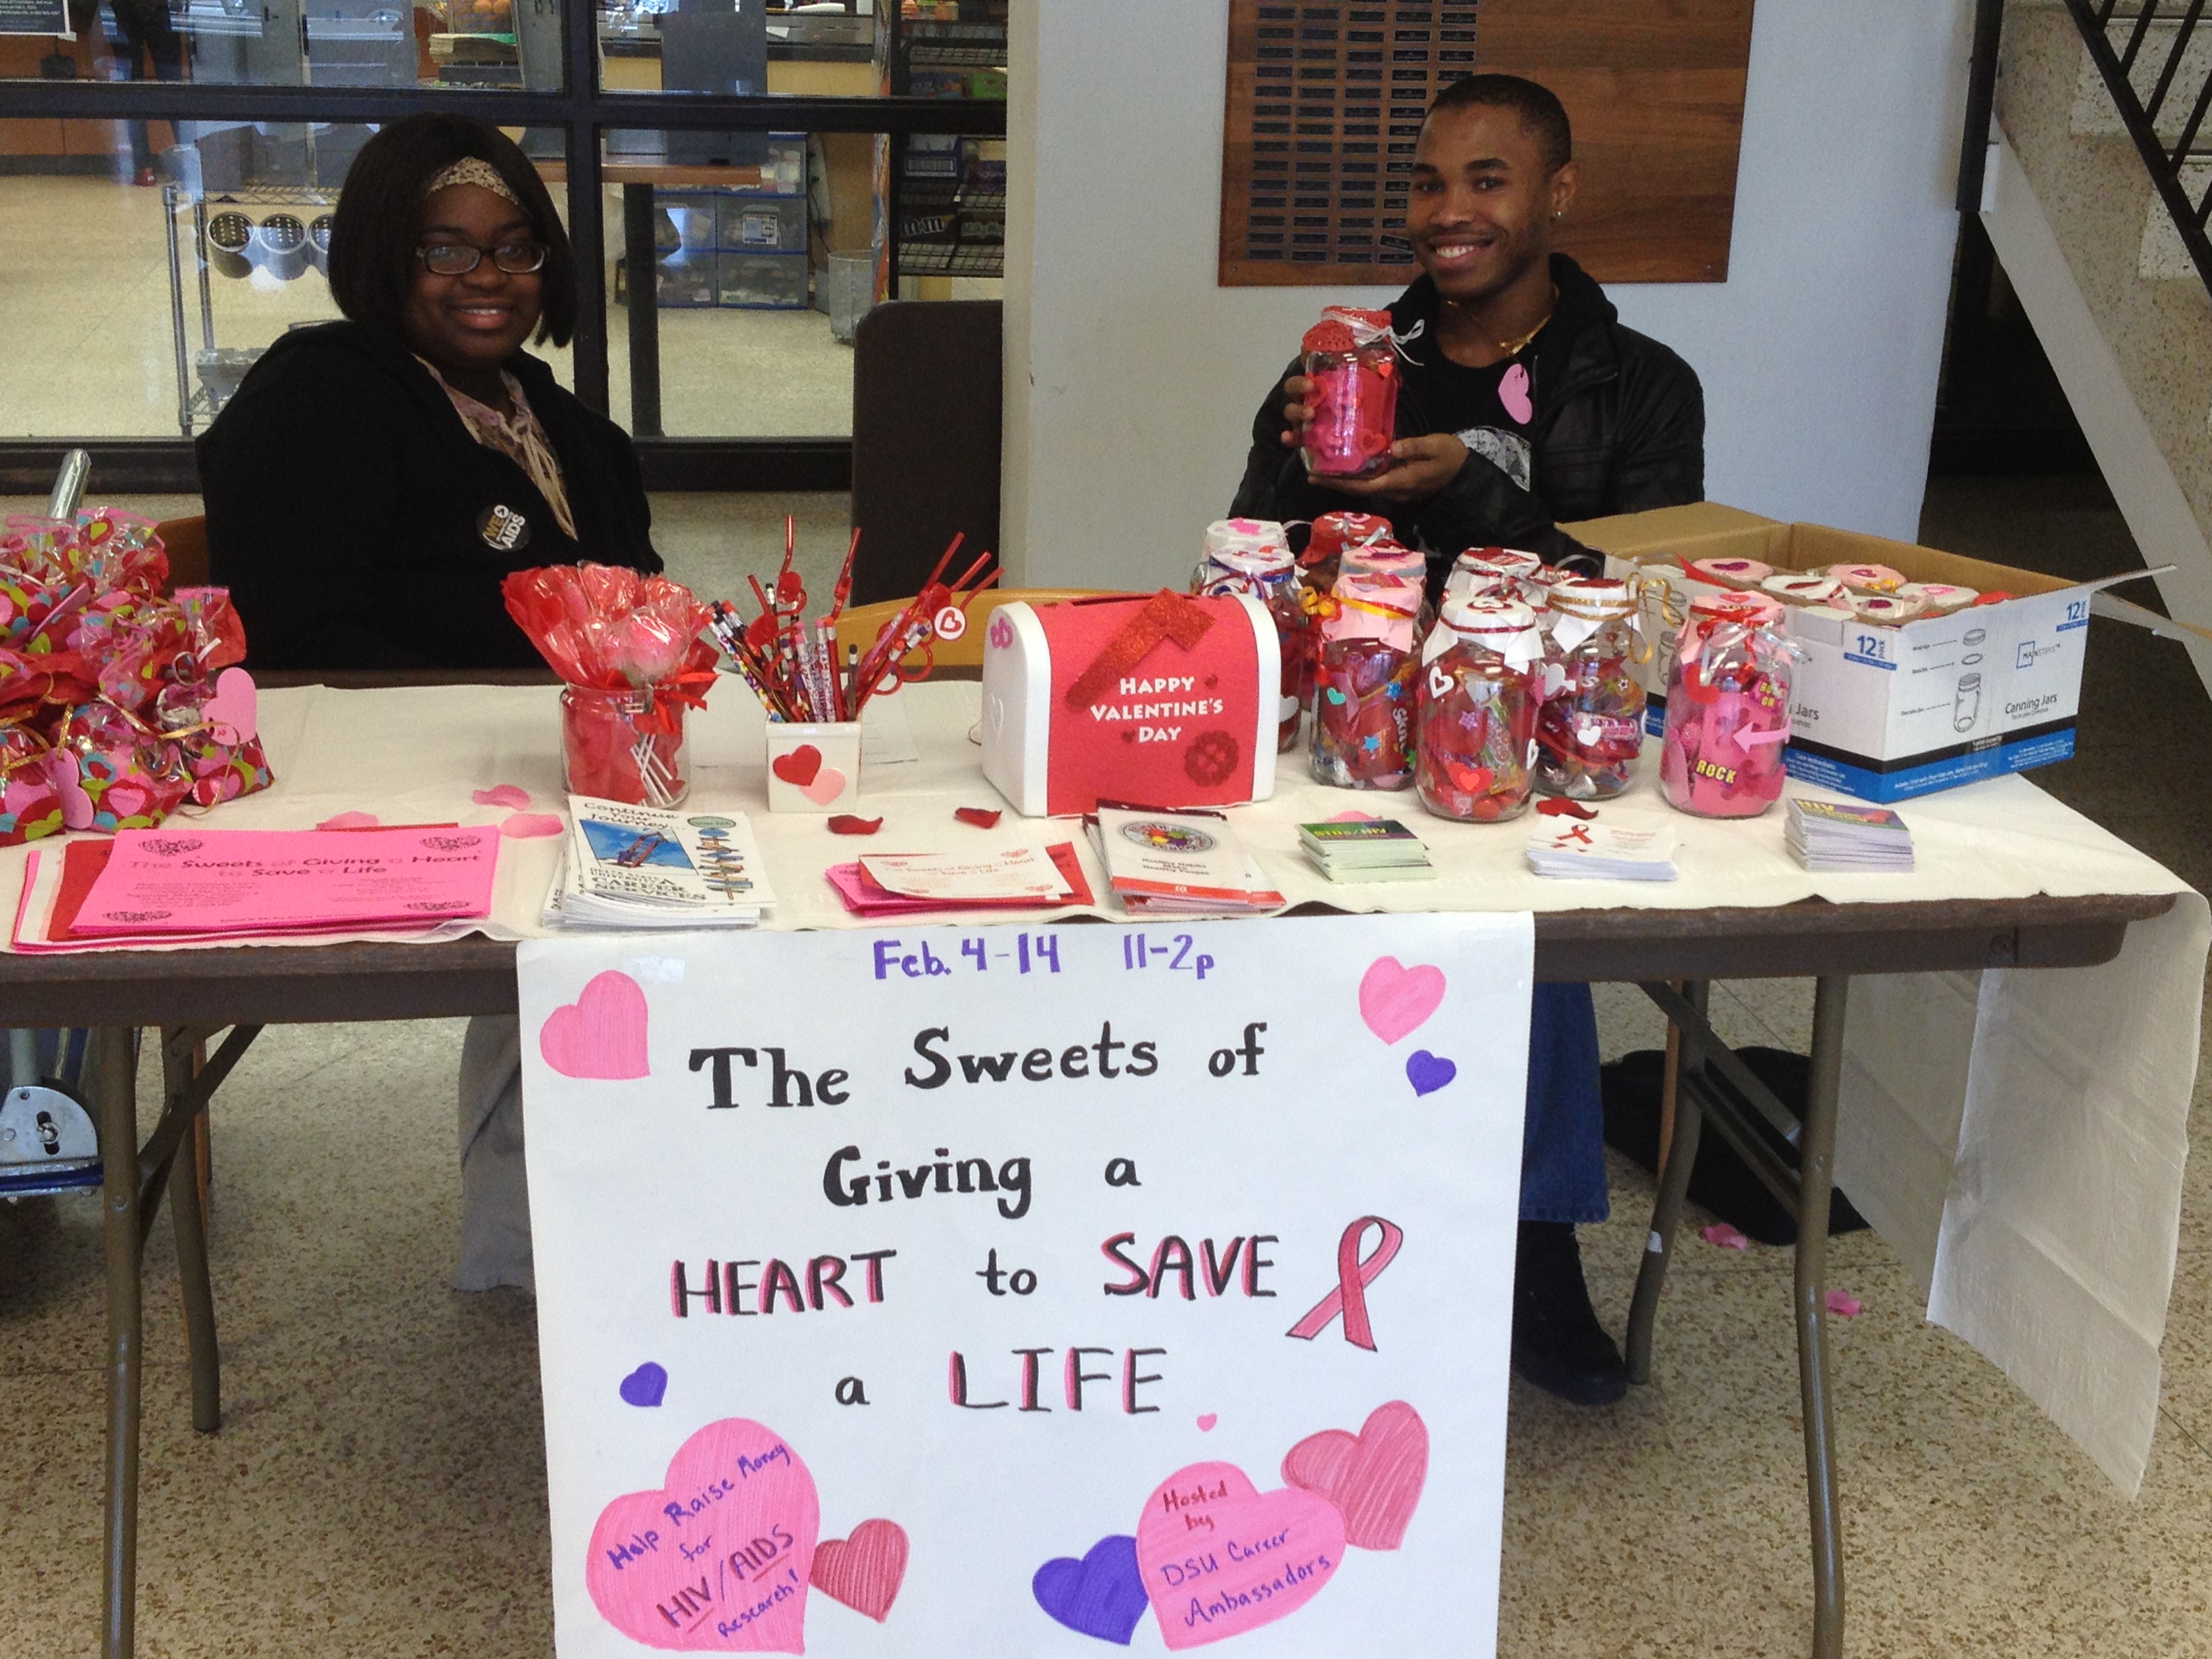 PHOTO: From left, Dolores Hemphill, senior child development major from Indianola, and Dimitrius Sneed, junior criminal justice major from Memphis sell Valentine’s Day gifts to raise funds for HIV/Aids awareness.